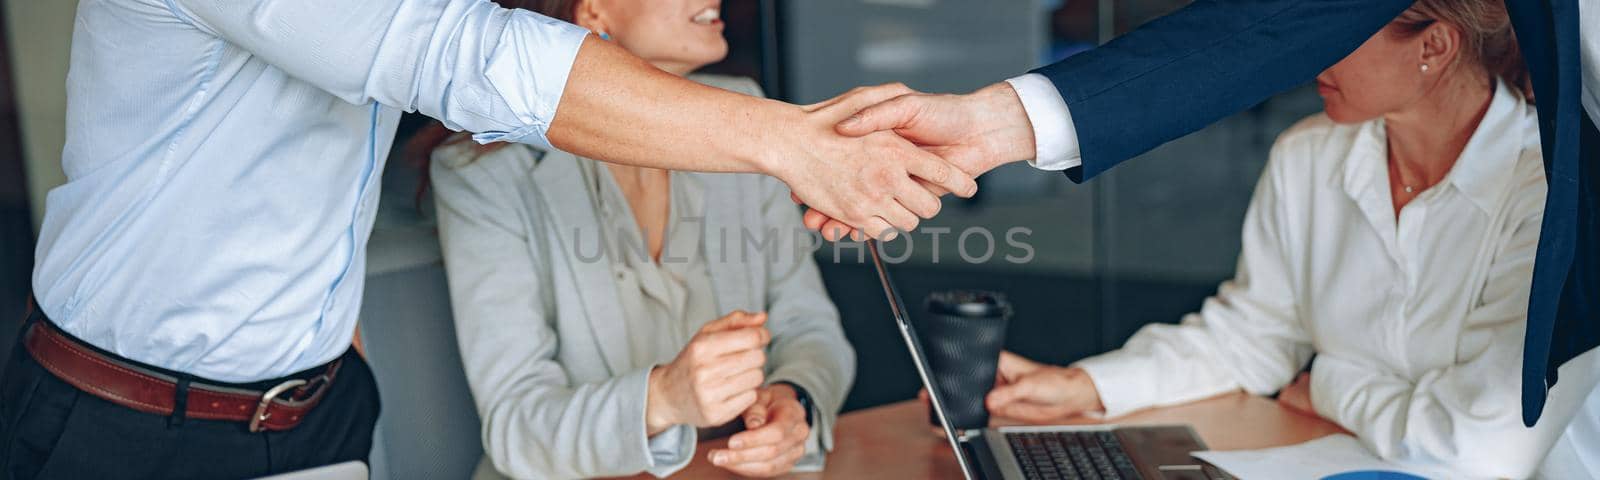 Business male partnership handshake. Photo handshaking process. Successful deal after meeting.